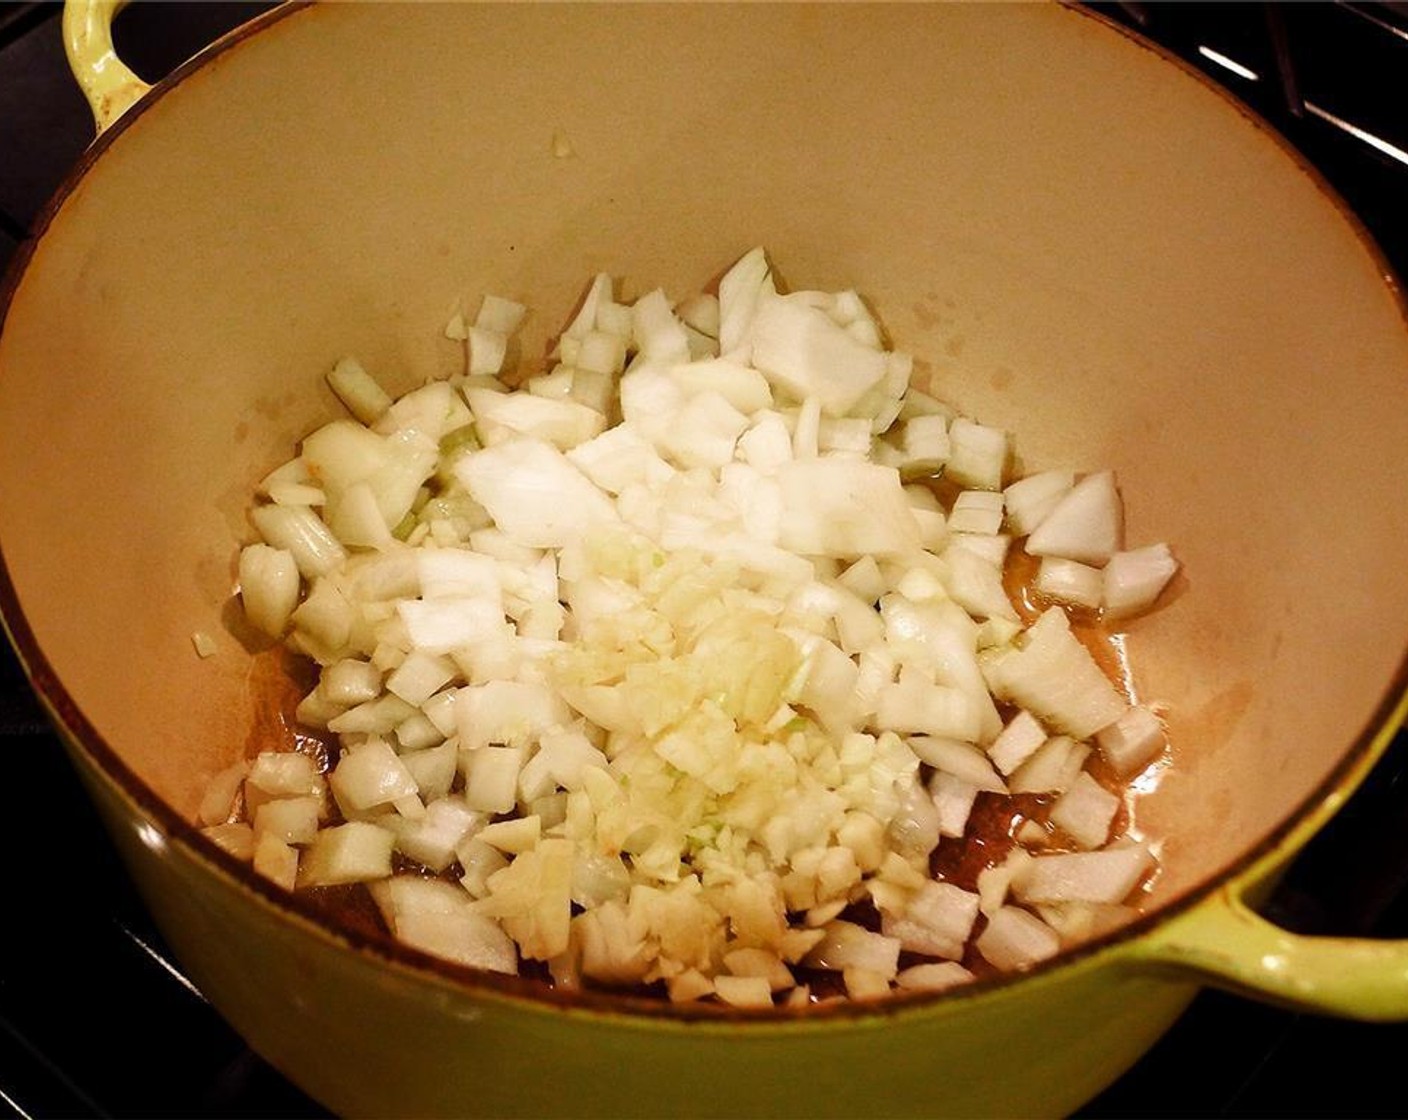 step 1 Heat the Olive Oil (2 Tbsp) in a large pot over medium-low heat and gently cook the Garlic (3 cloves) and Onion (1) for about 5 minutes, until soft and translucent.